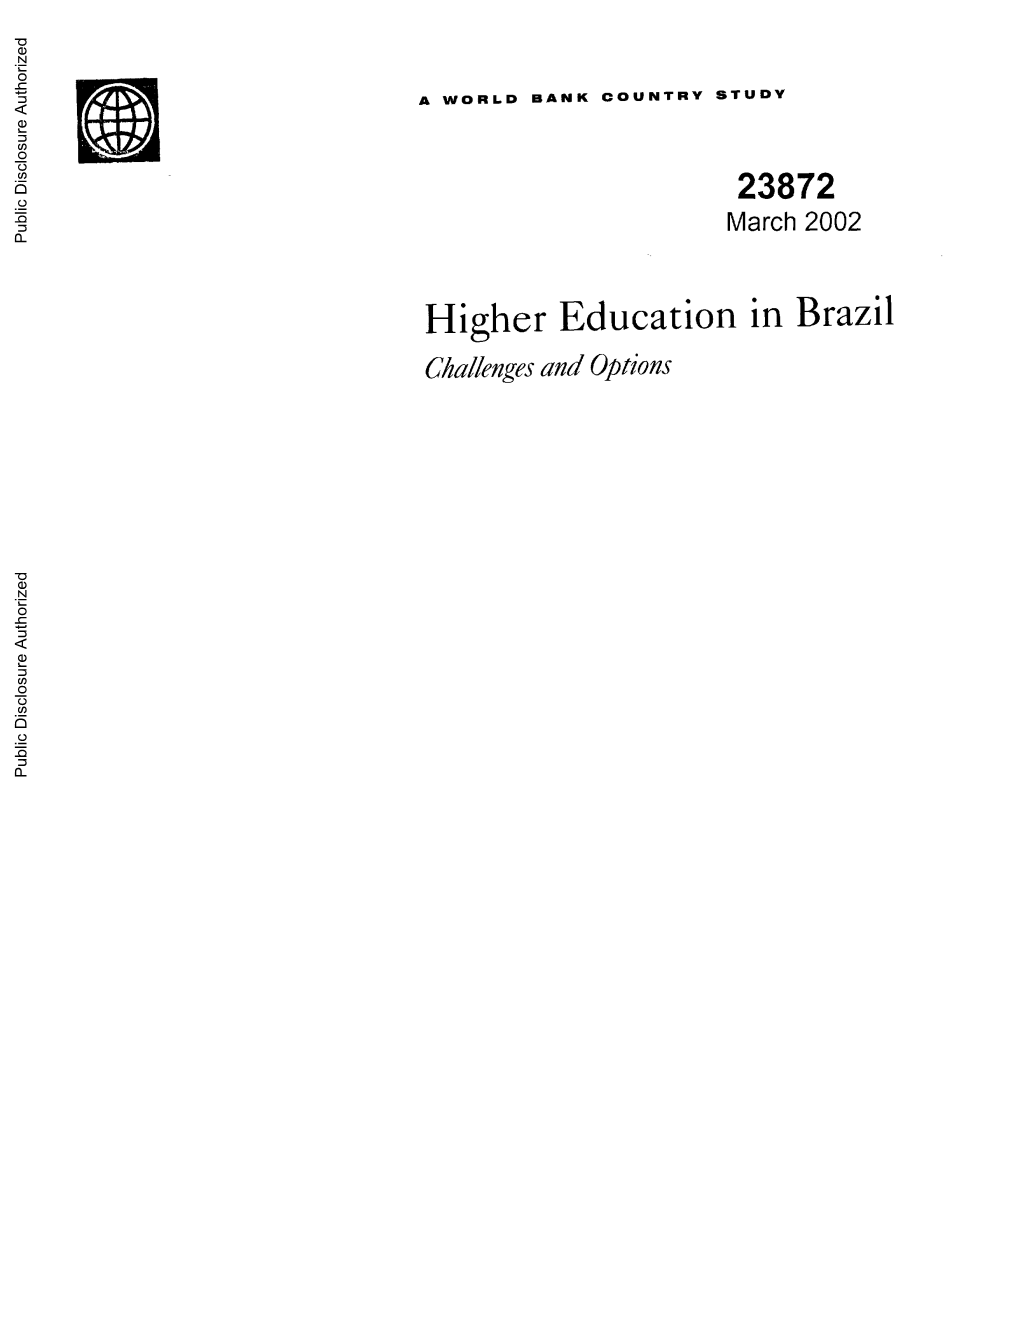 Higher Education in Brazil : Challenges and Options